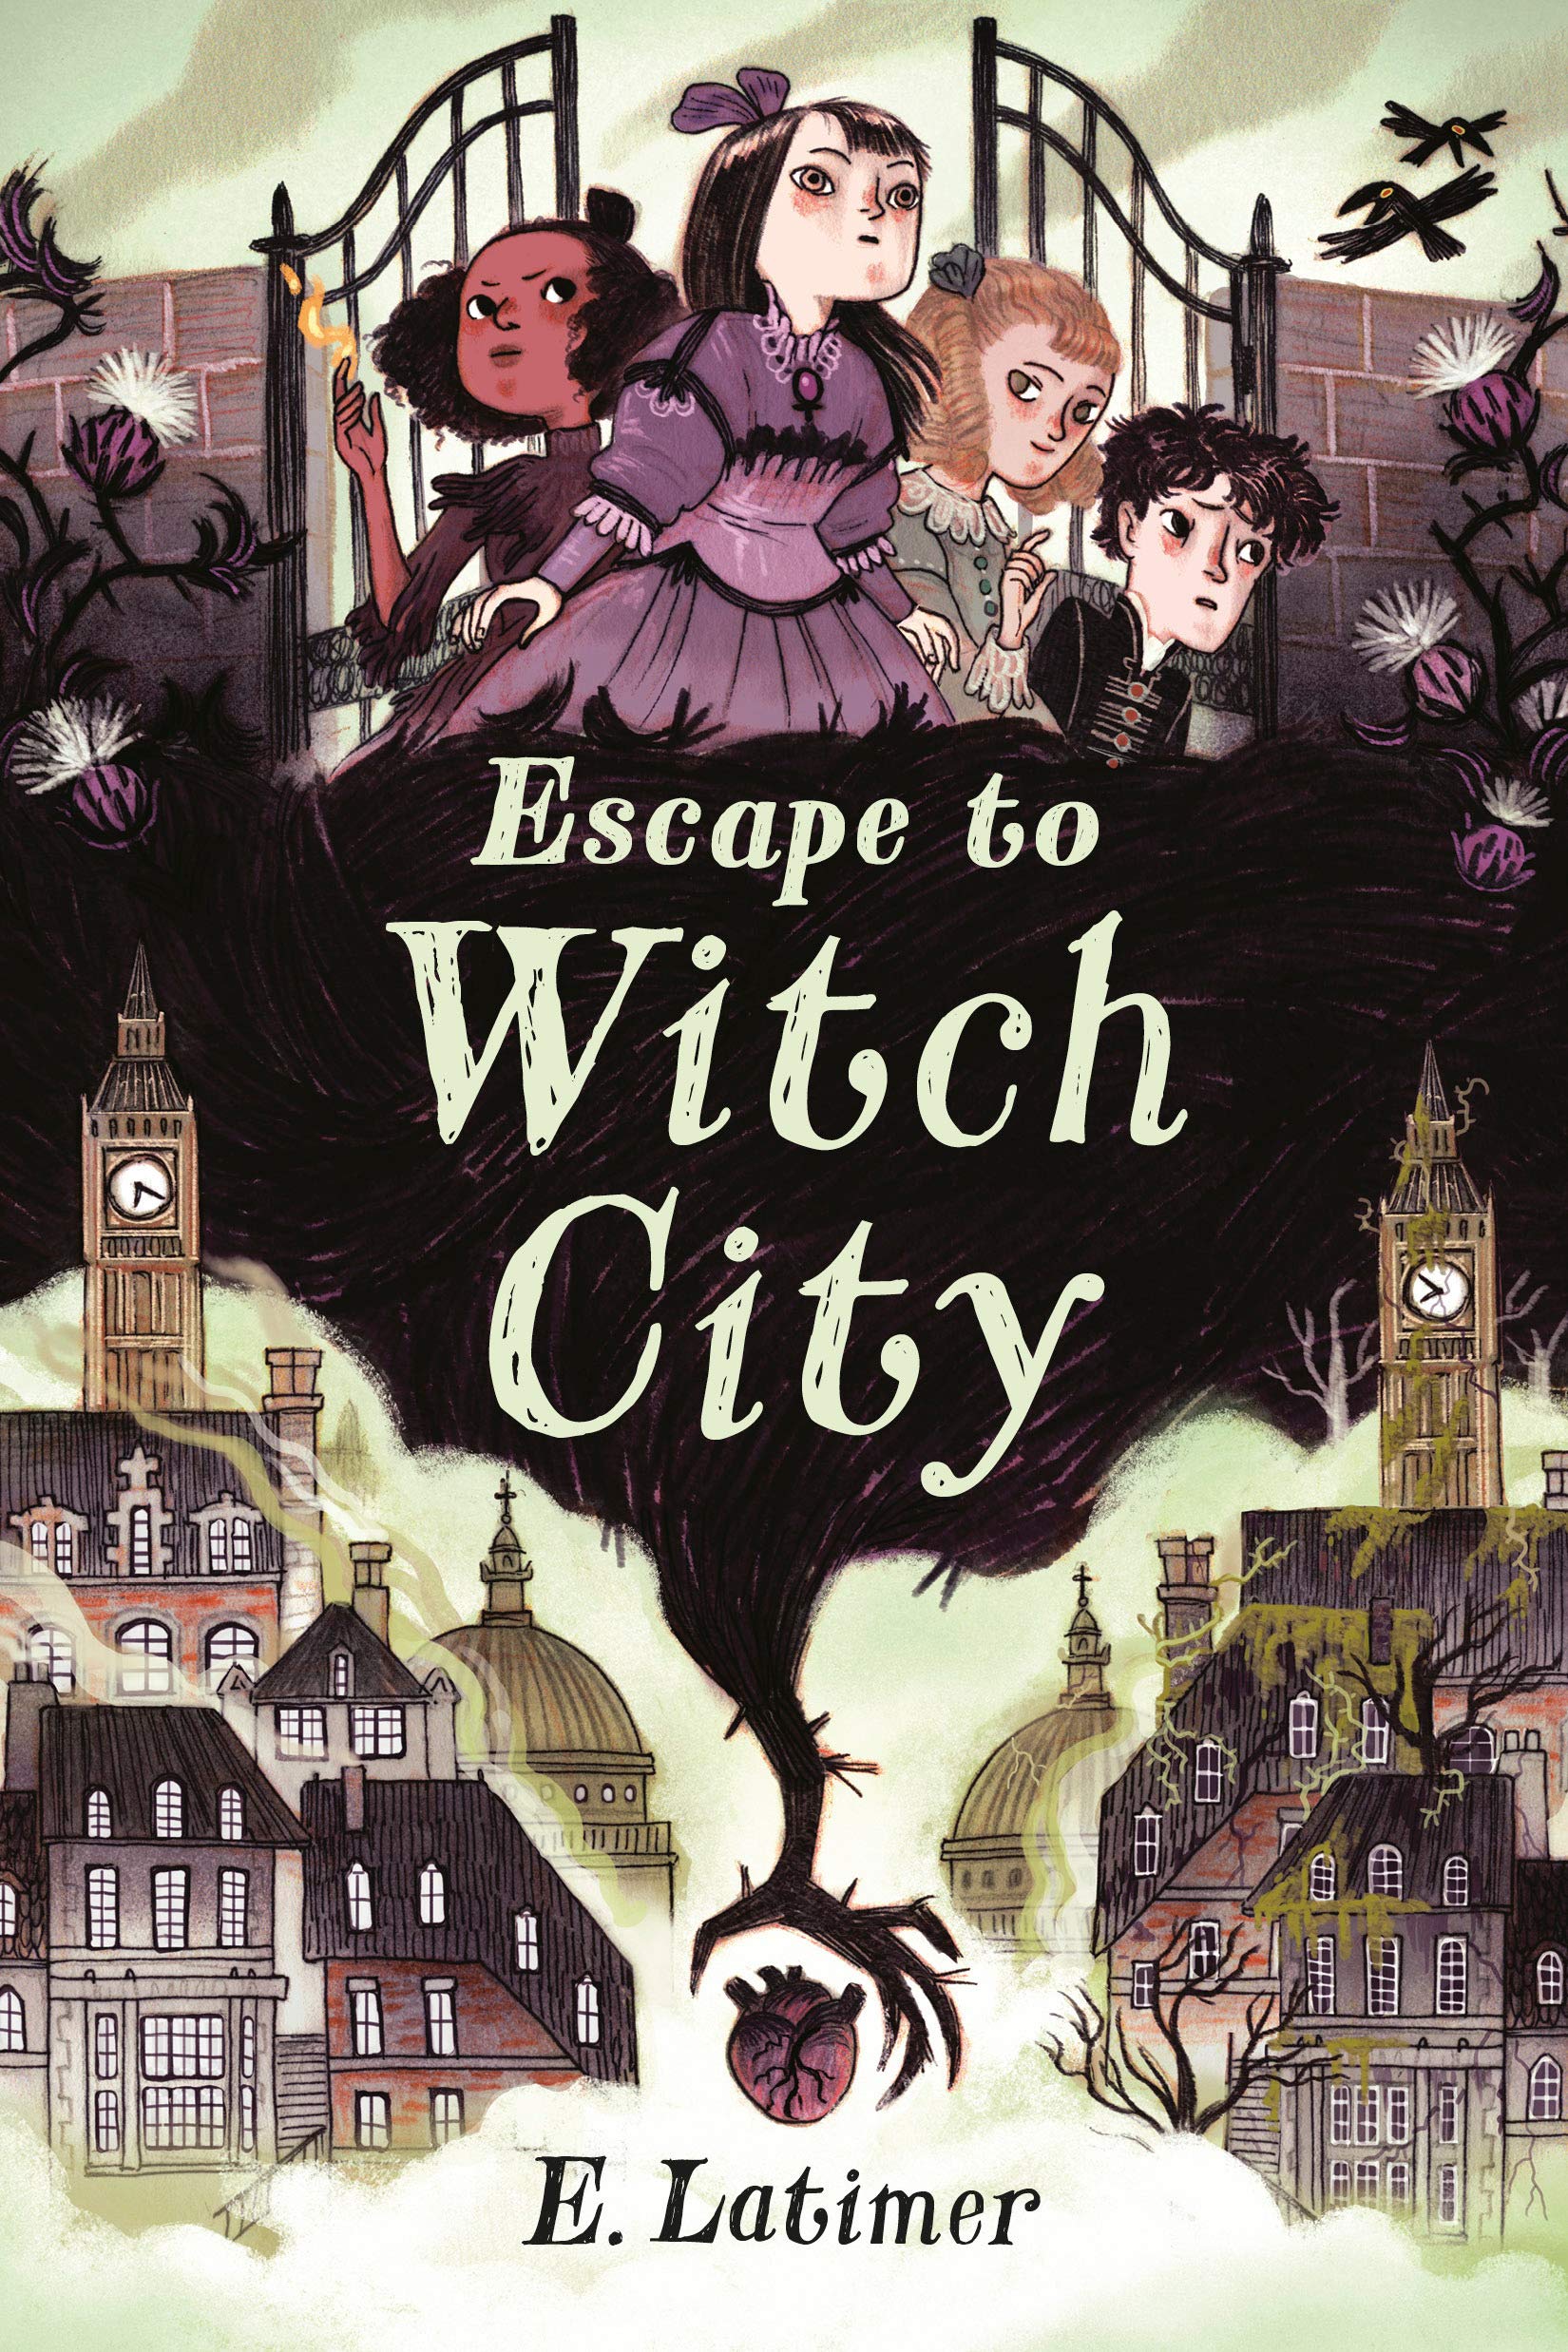 Escape to Witch City Hardcover by E. Latimer